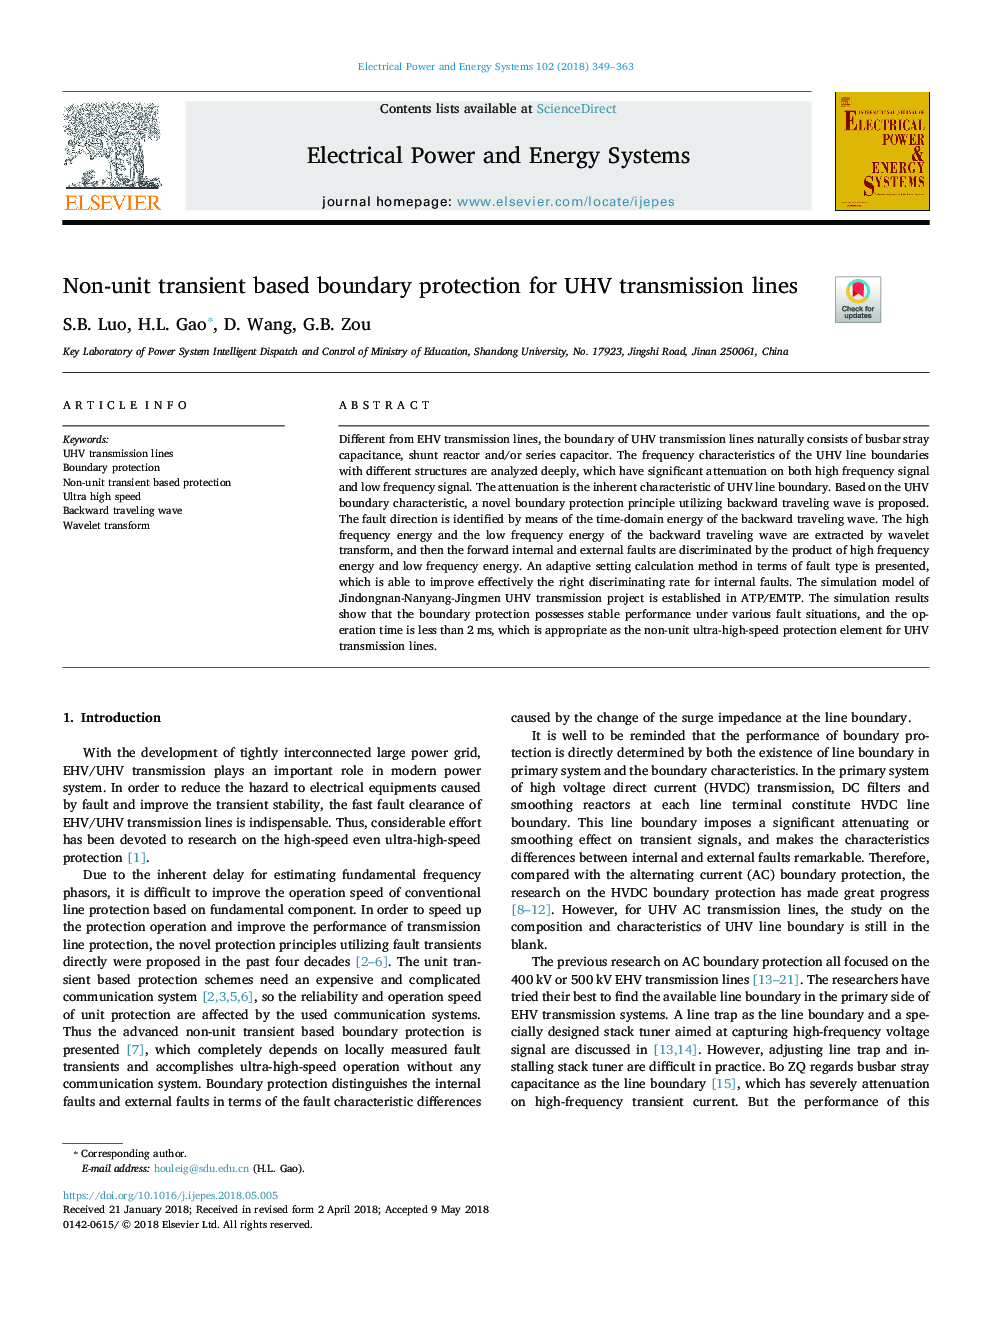 Non-unit transient based boundary protection for UHV transmission lines